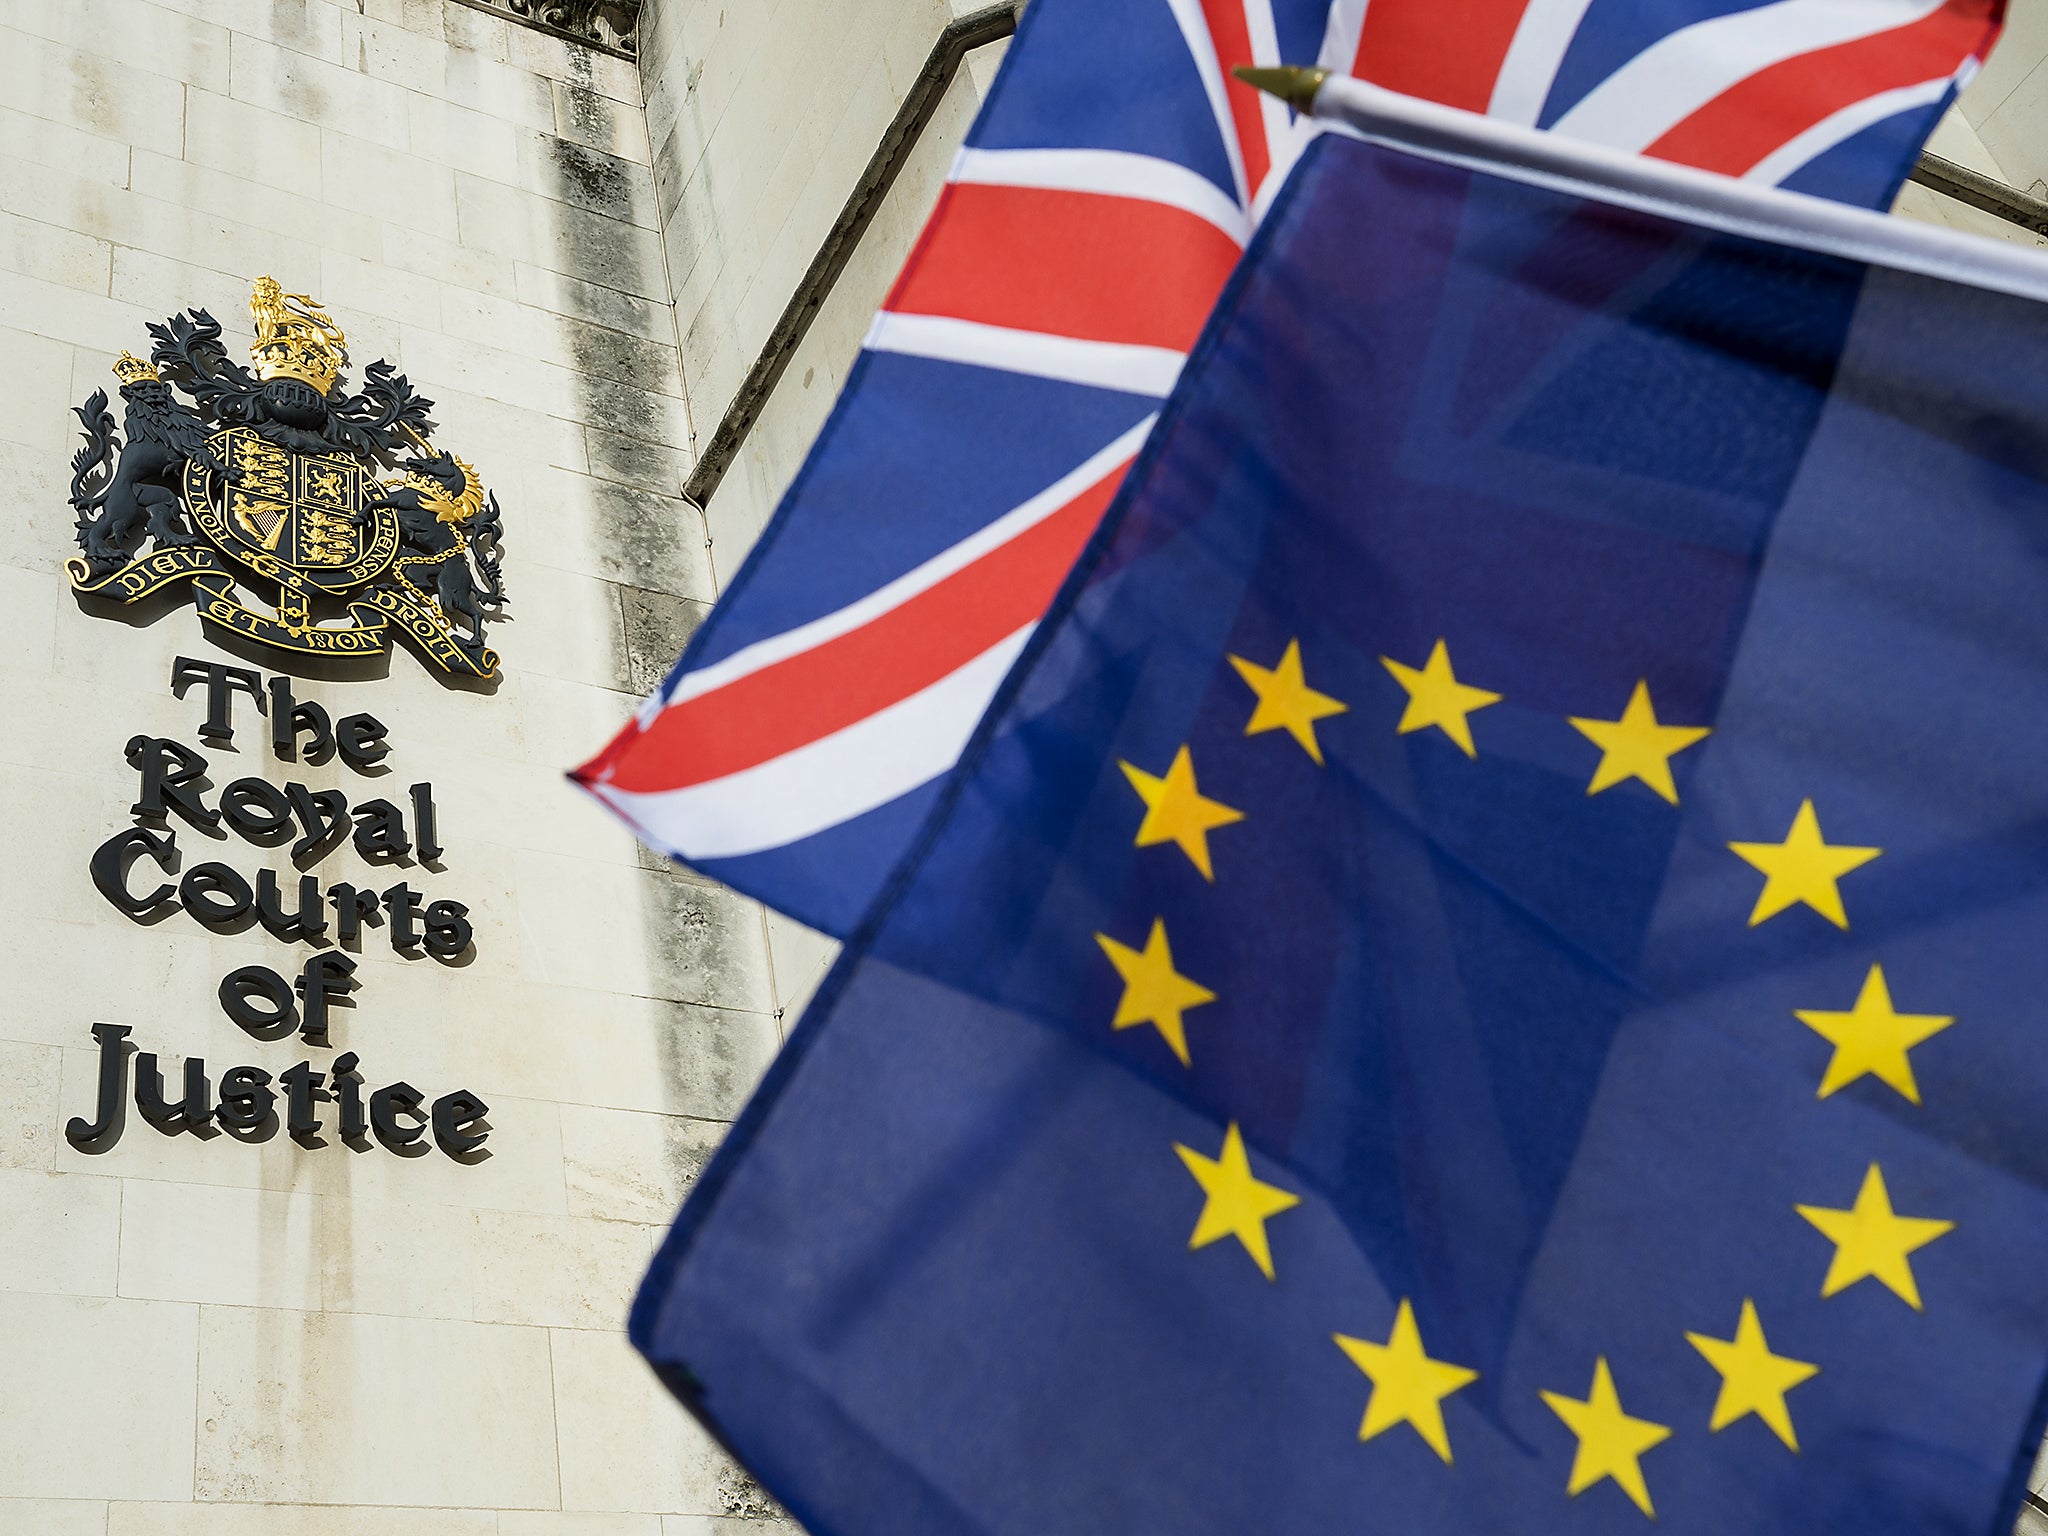 The legal services industry contributes £3.6bn of Britain’s exports and trade